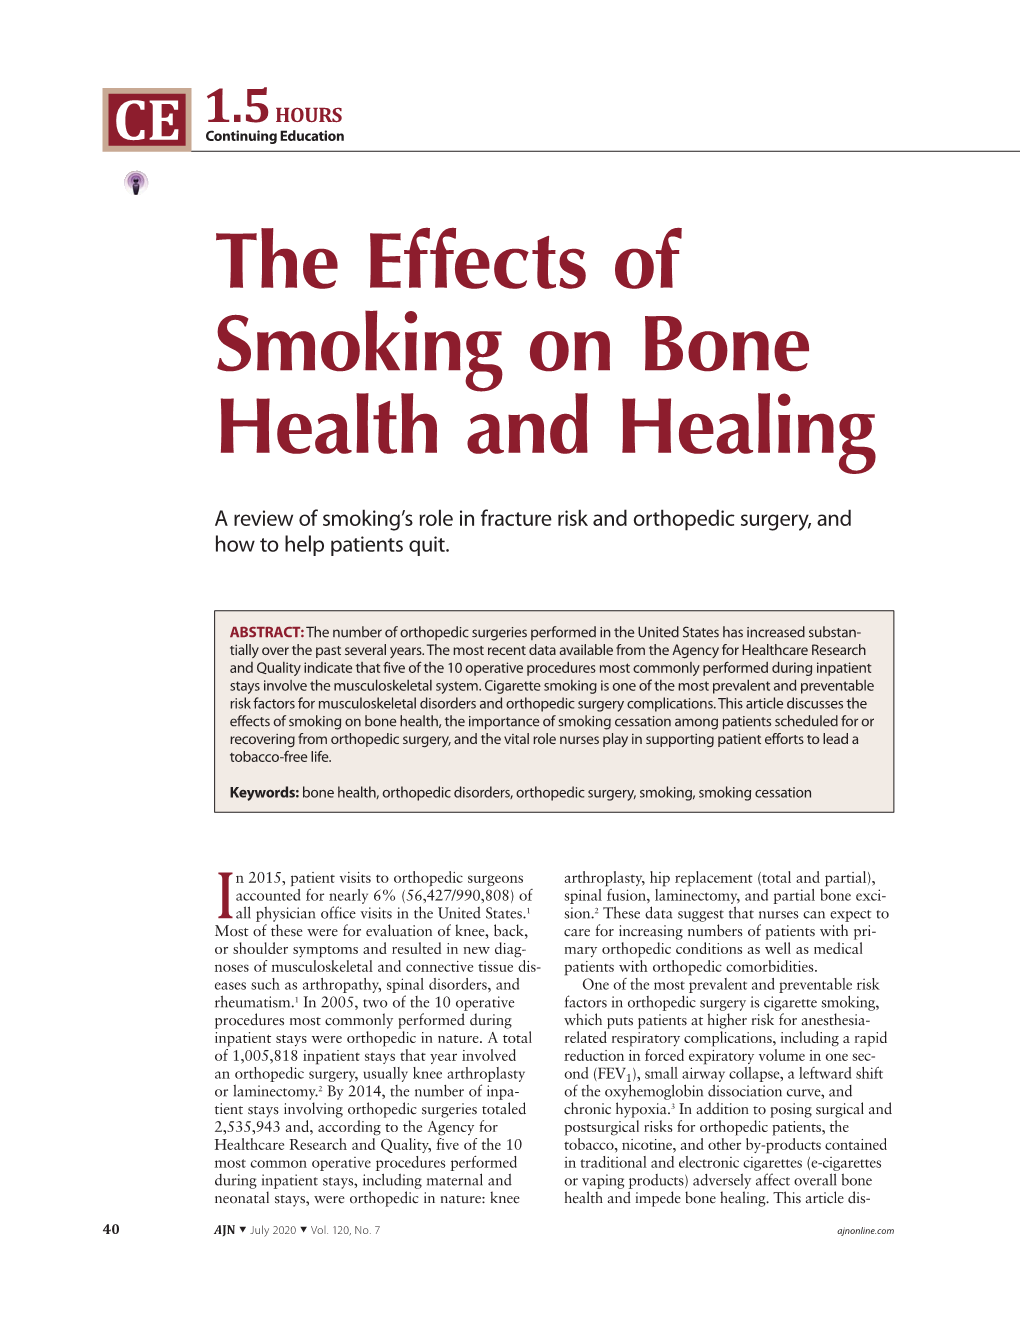 The Effects of Smoking on Bone Health and Healing